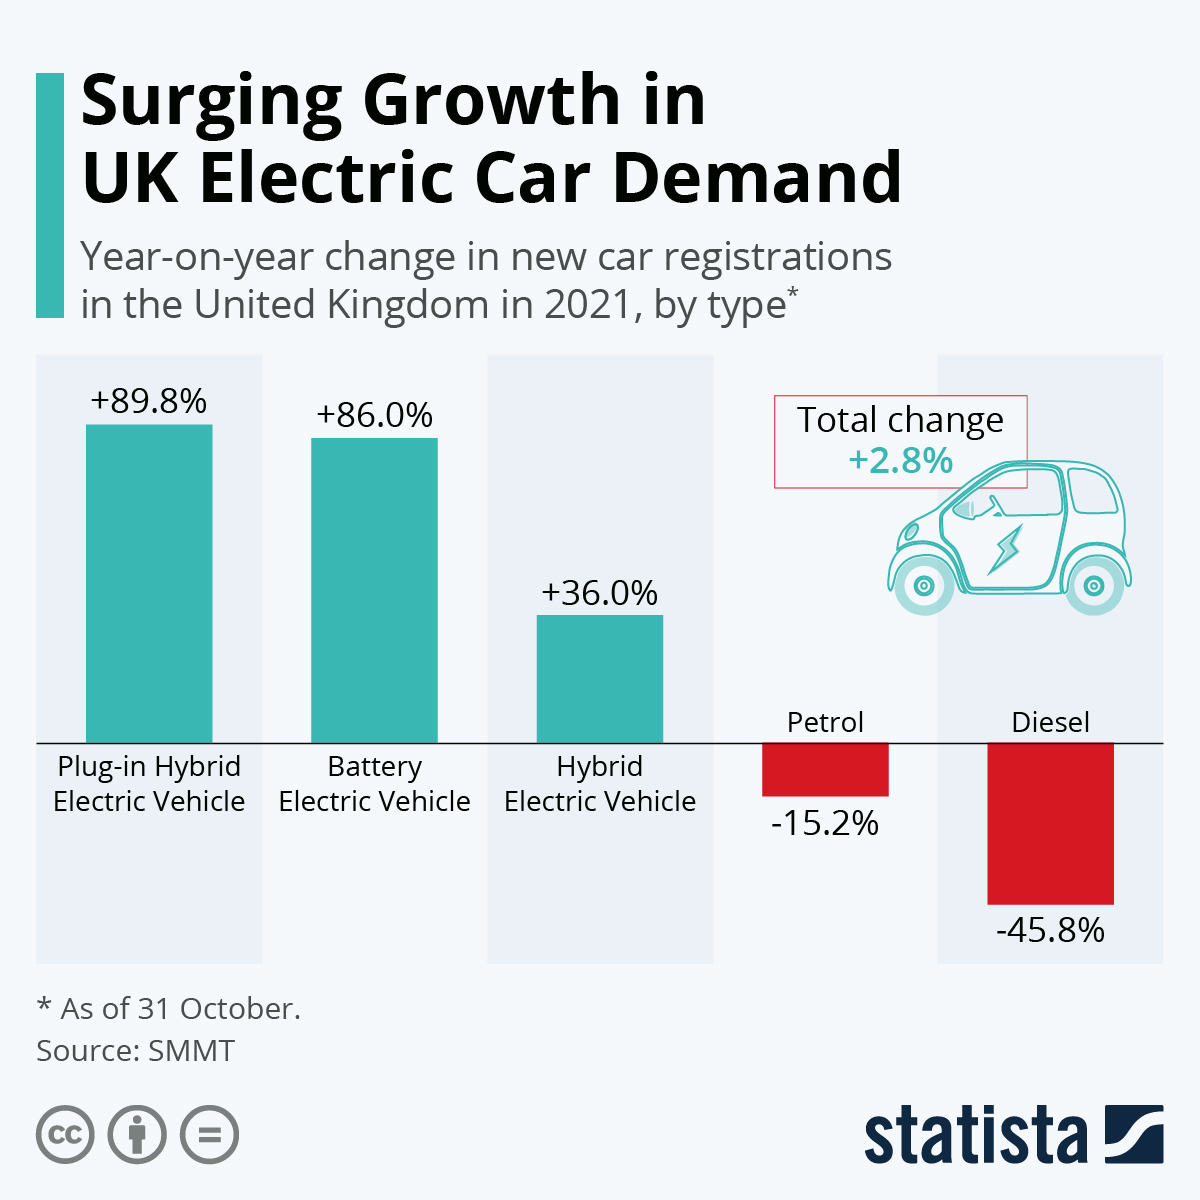 Surging Growth in UK Electric Car Demand